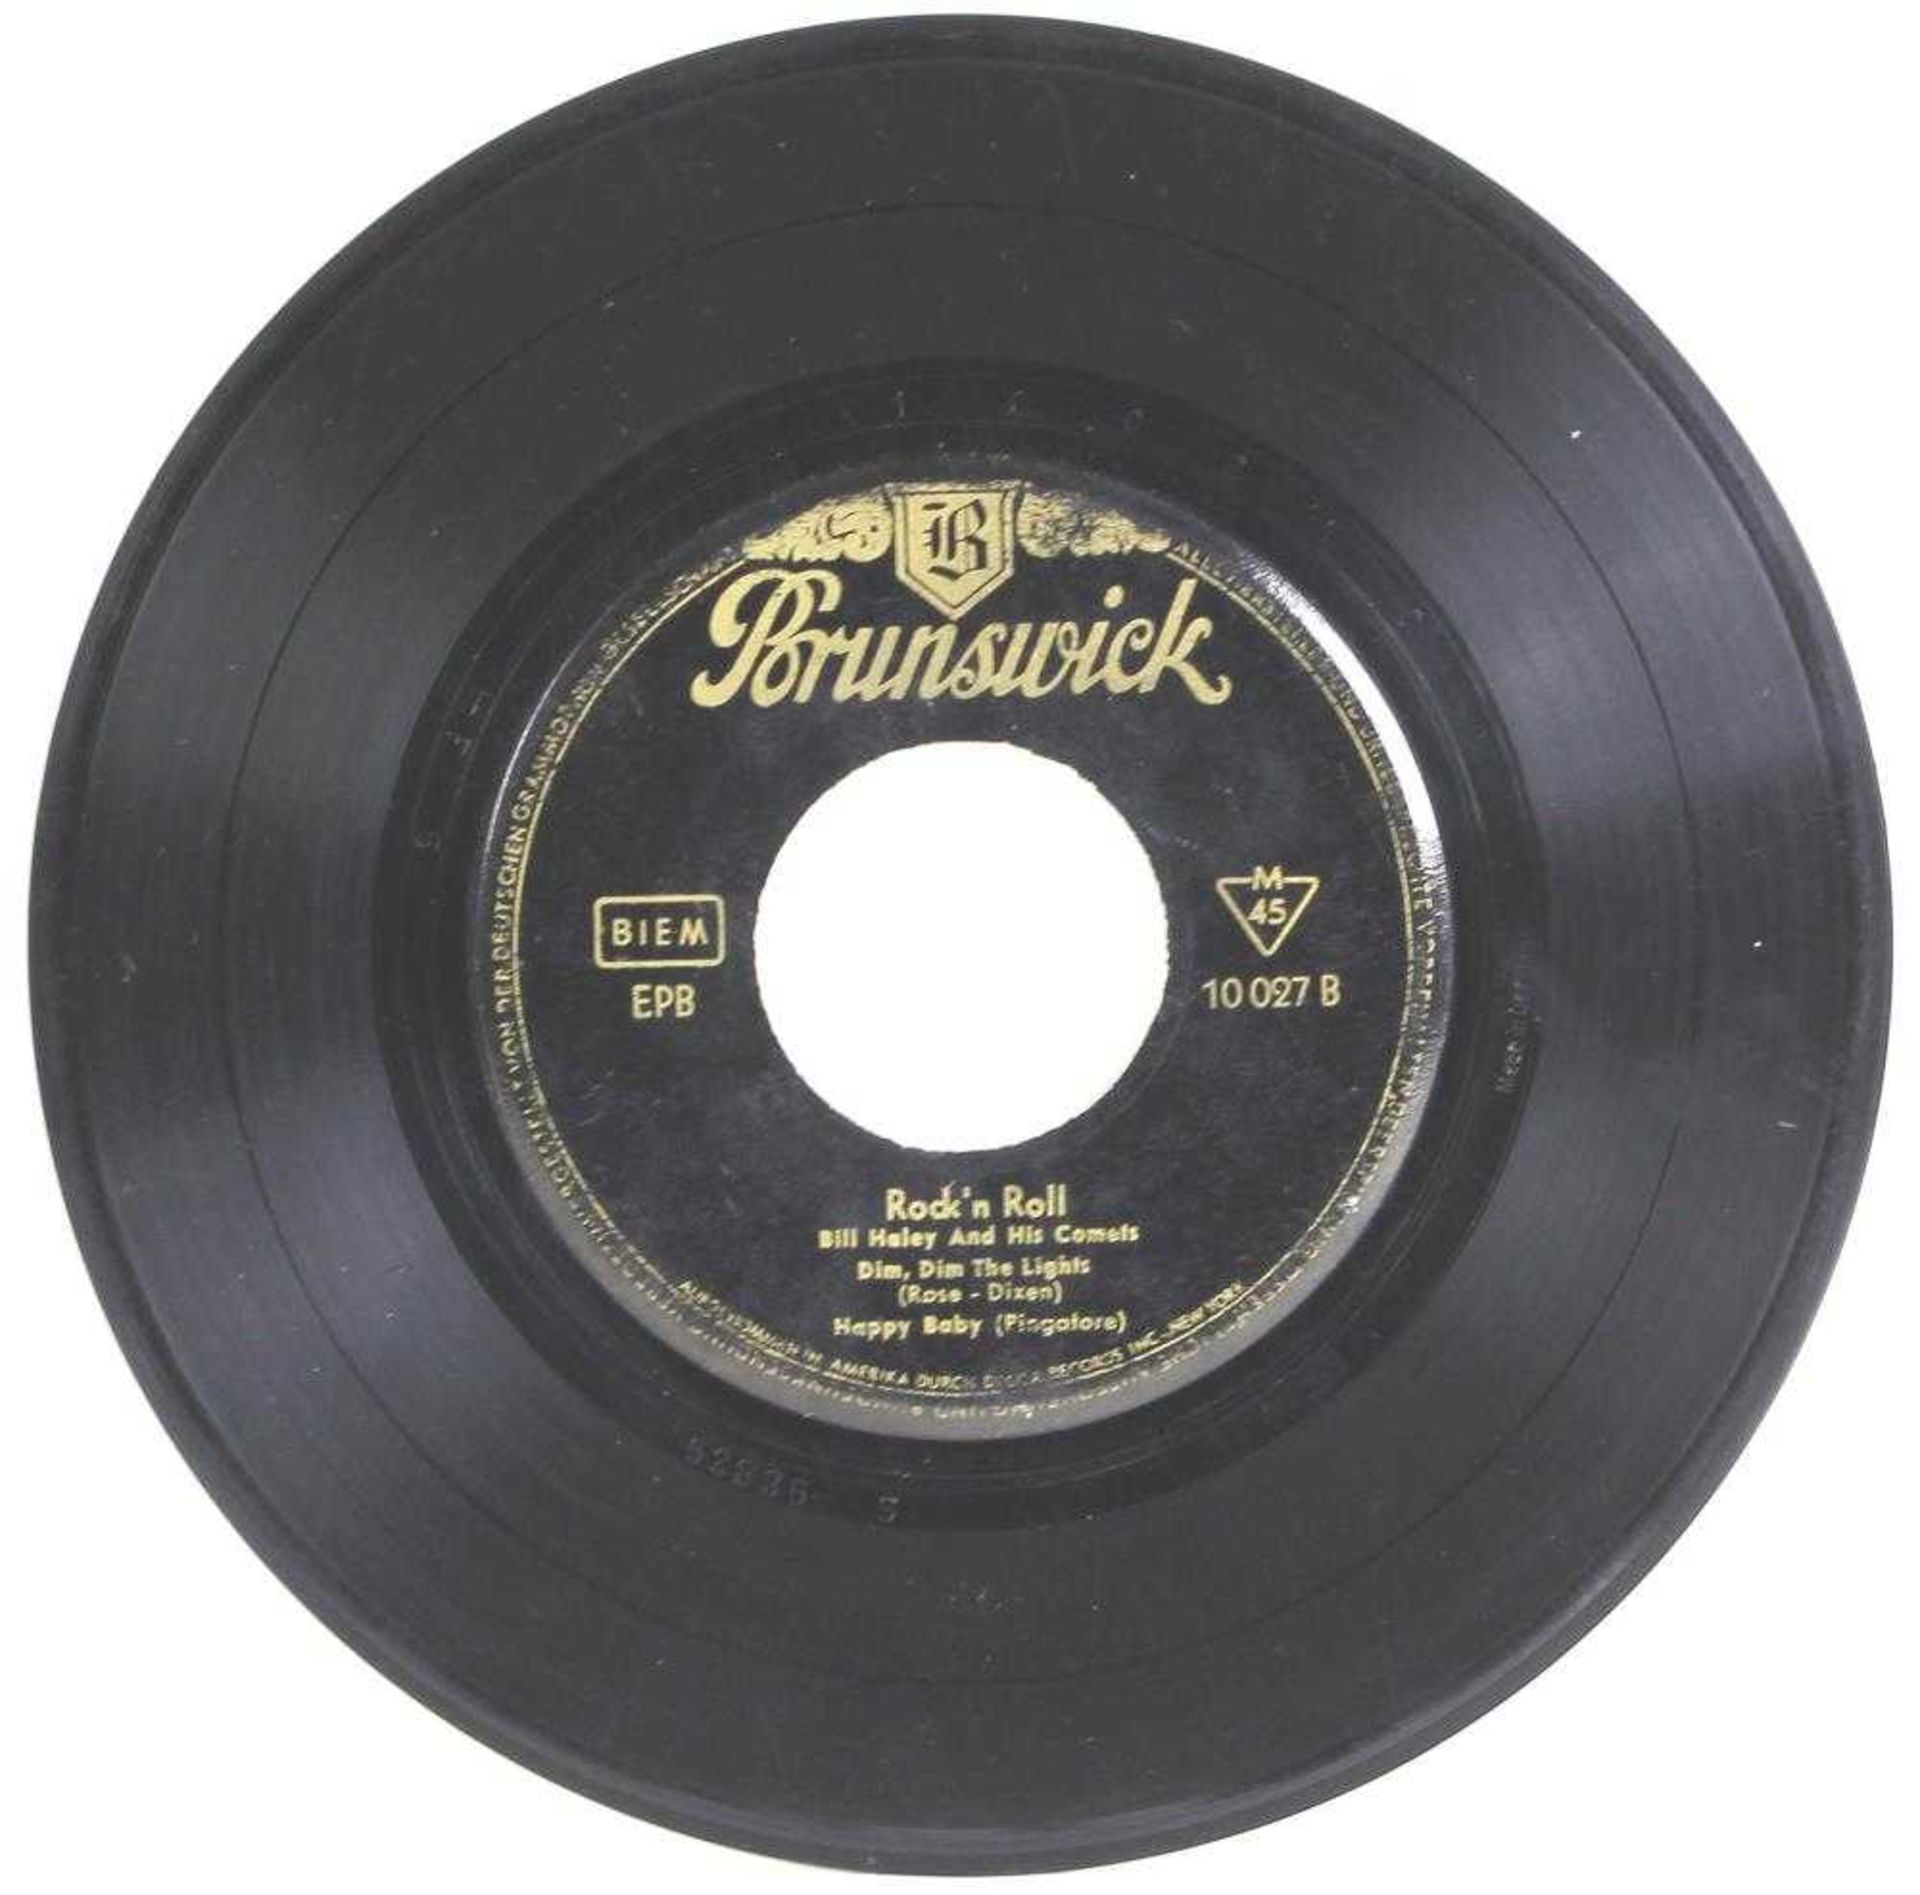 Bill Haley and his Comets Rock´n Roll. Shake Rattle And Roll, Rock Around The Clock, Dim, Dim The - Image 4 of 4